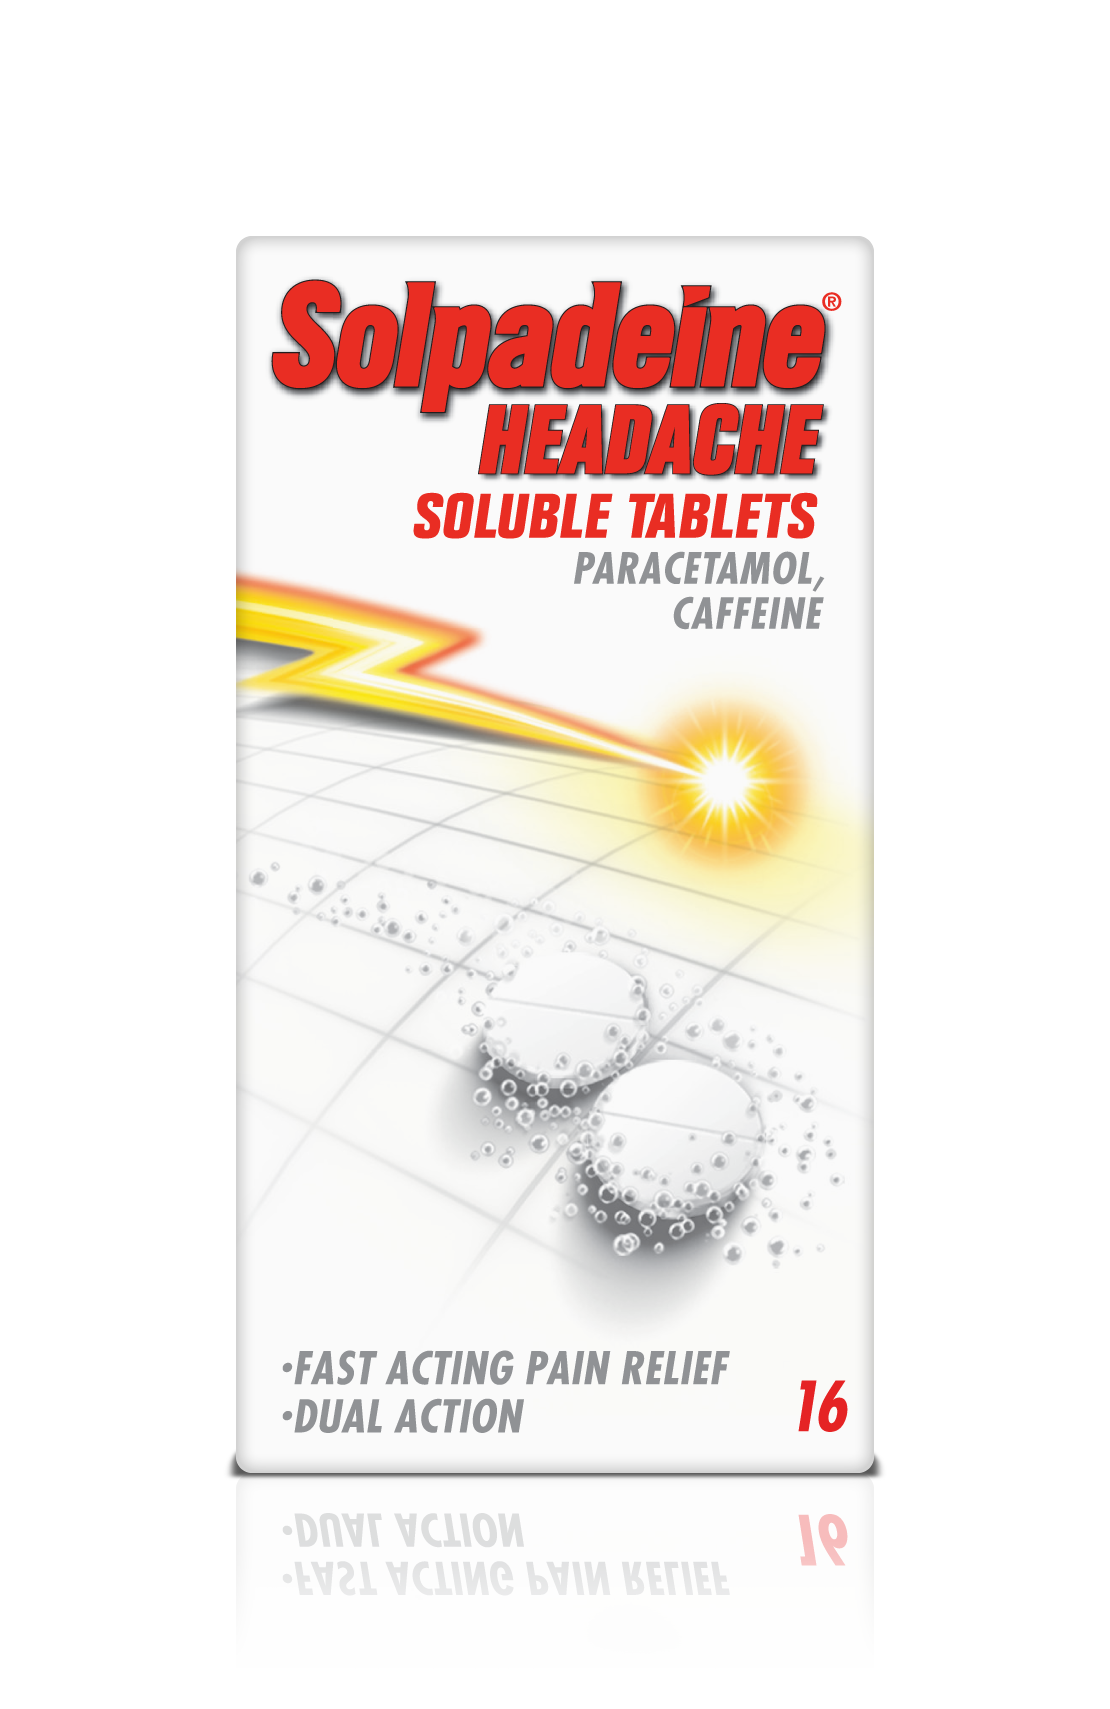 Solpadeine Headache soluble tablets product packaging